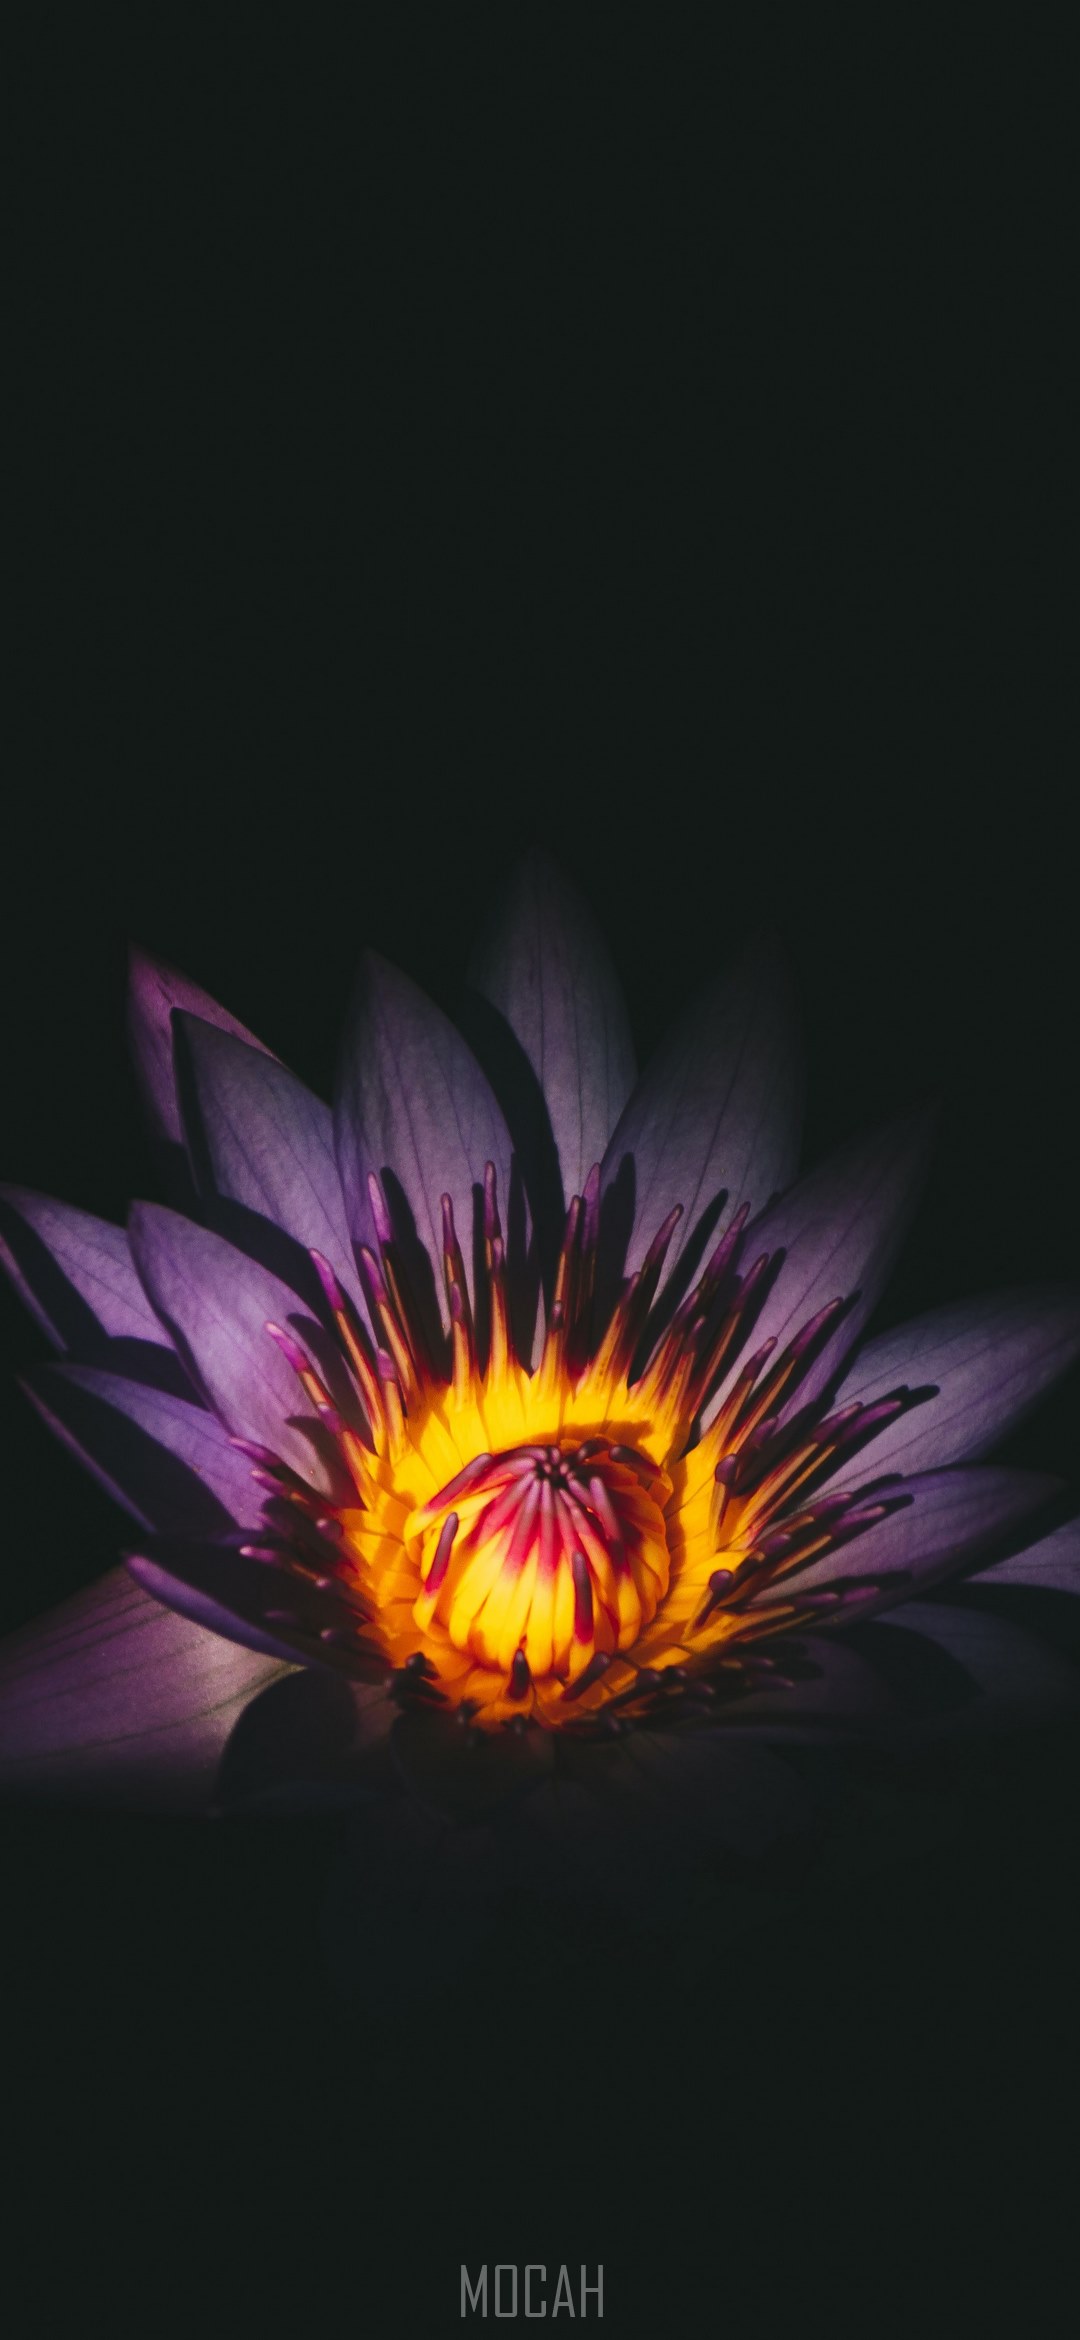 a close up of a dark purple flower with a yellow center against a black background, dark purple flower, Oppo A7x full HD wallpaper, 1080x2340 Gallery HD Wallpaper